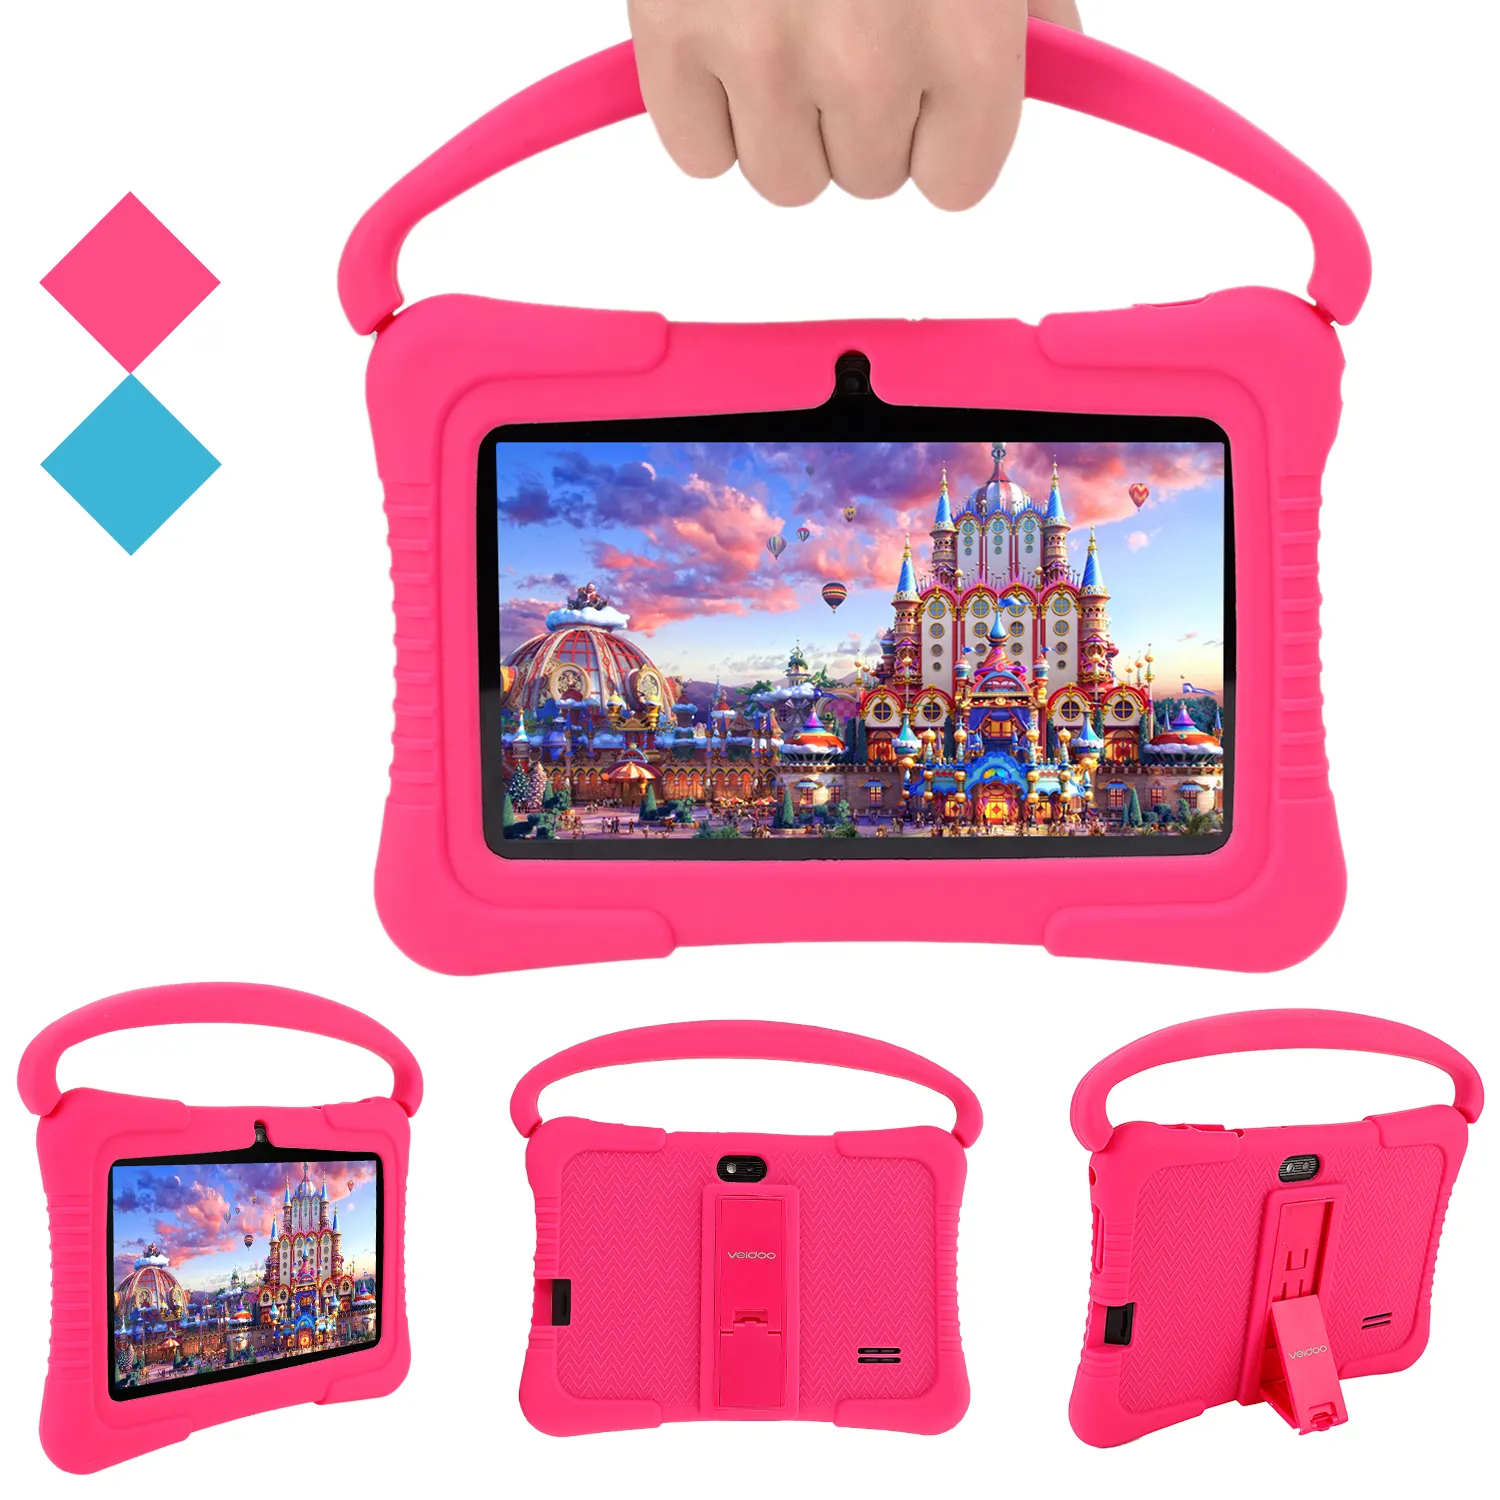 Veidoo 7 inch Kids Android Tablet Eye Protection Screen Educational Tablets Dual Camera Quad Core Tablet Pc with Silicone Case